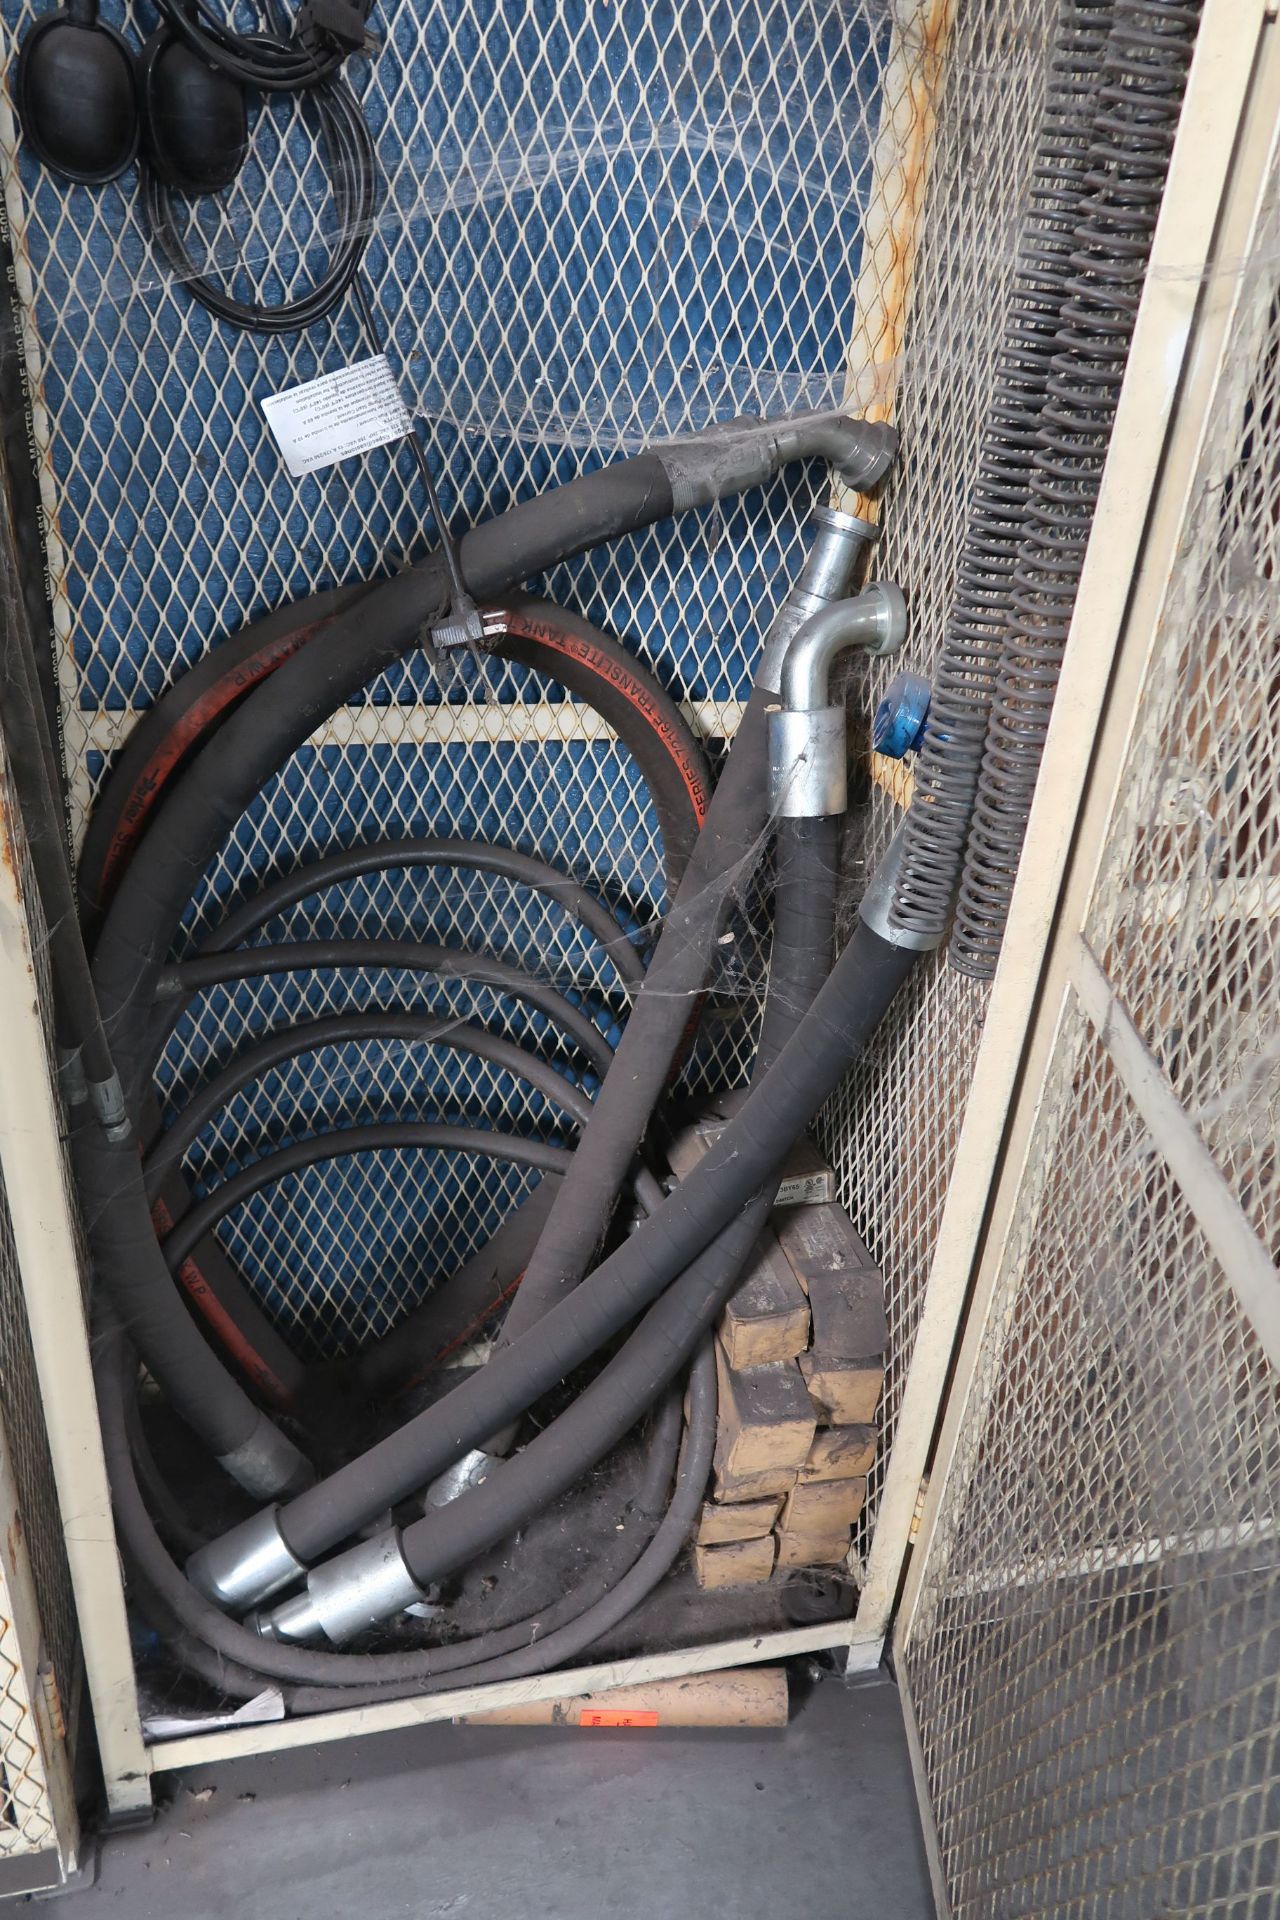 CAGE TYPE RACK WITH CONTENTS - PARTS **LOADING PRICE DUE TO ERRA - $500.00** - Image 4 of 5